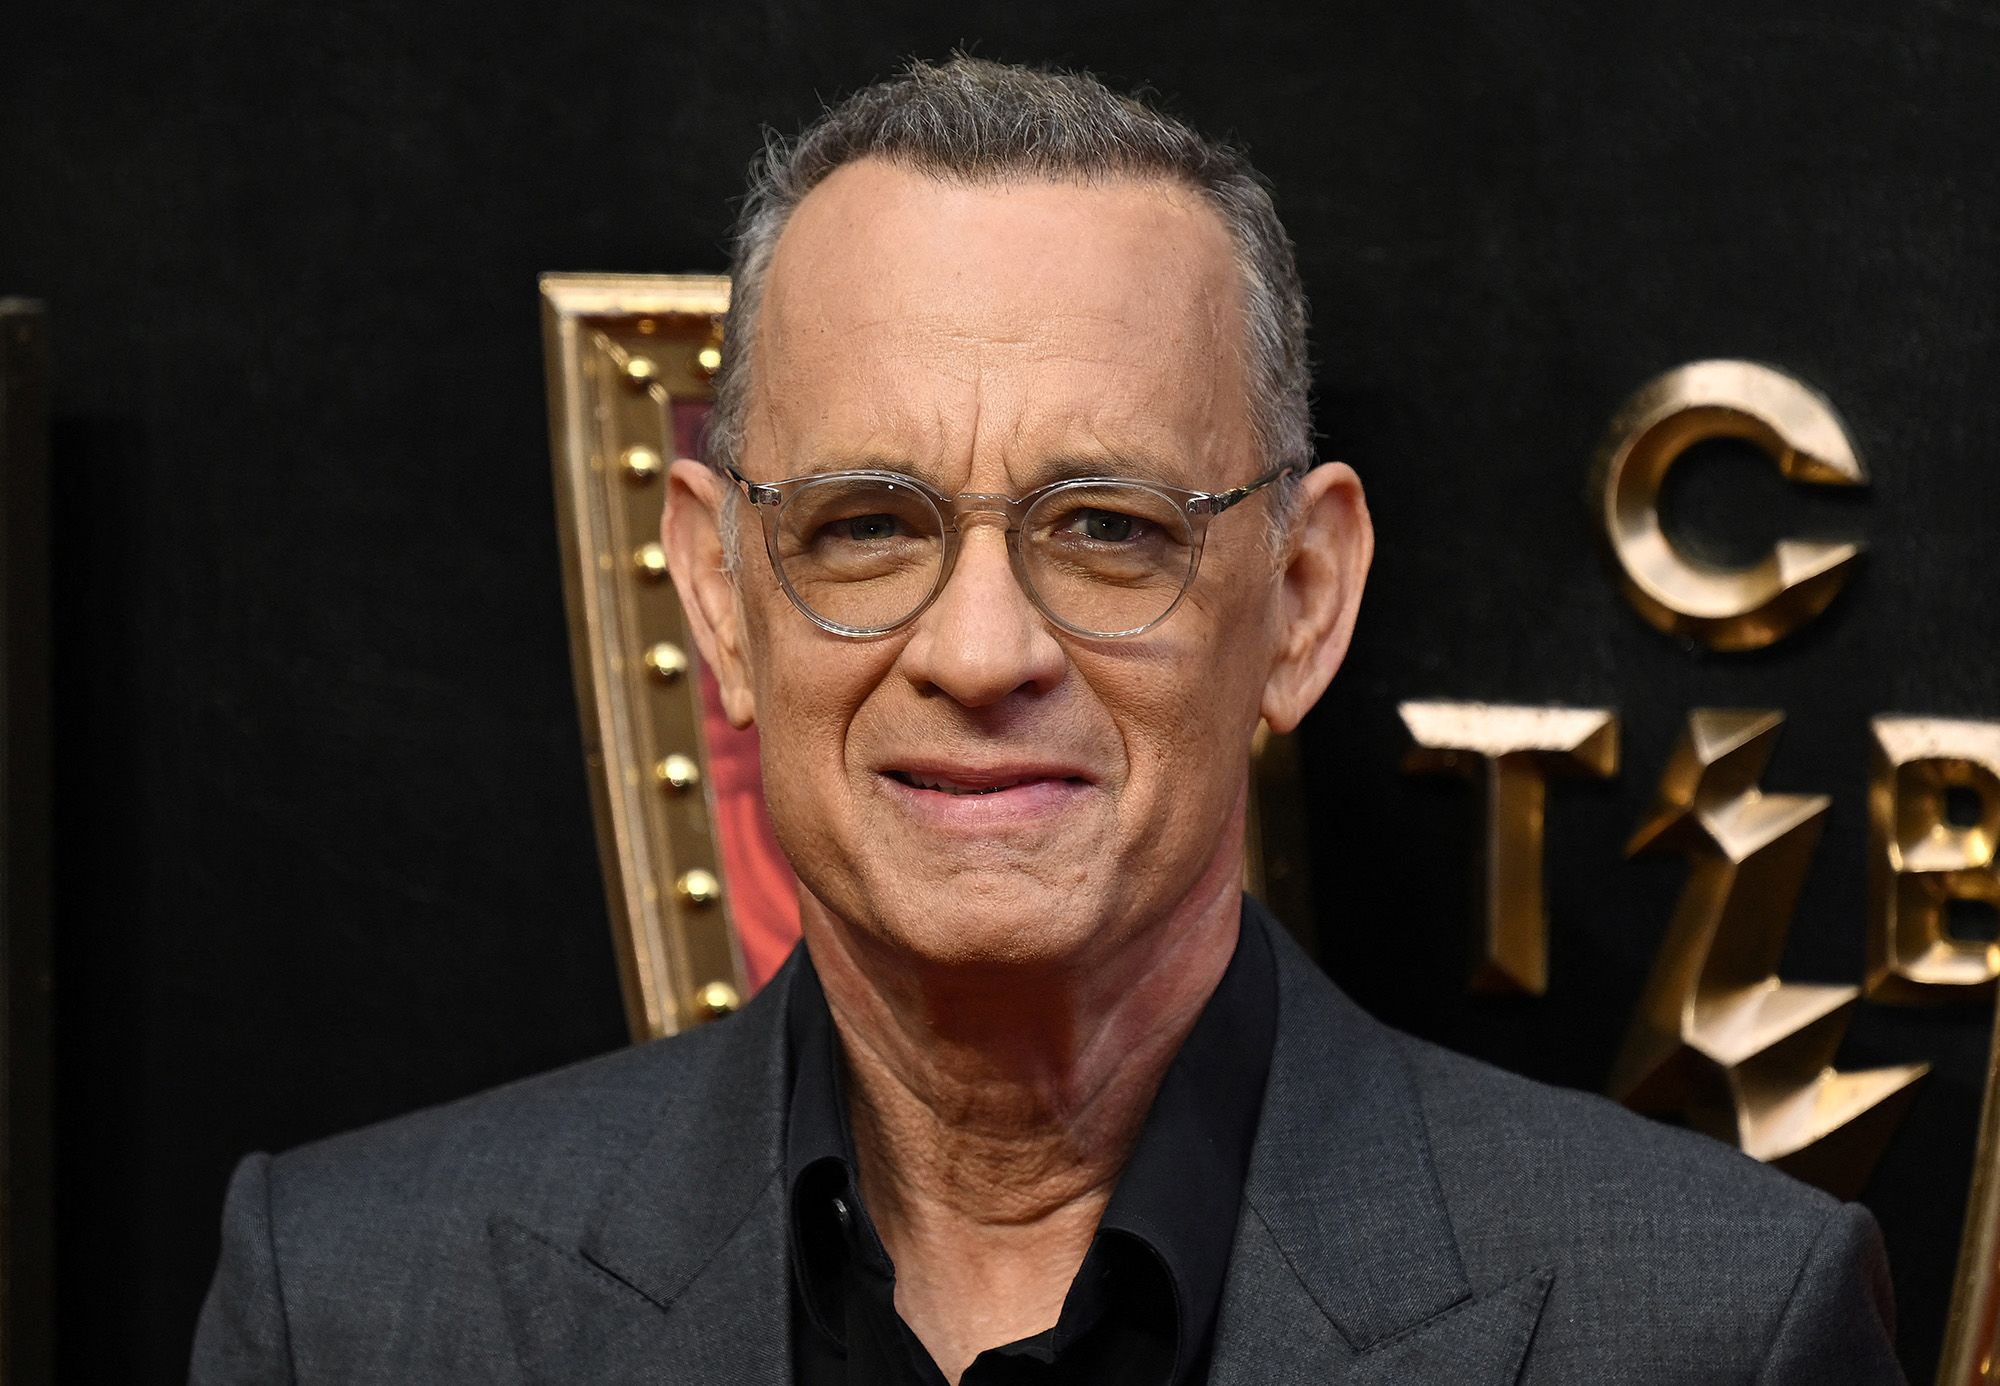 Tom Hanks says 'Philadelphia' wouldn't get made today with a straight actor  in a gay role | CNN